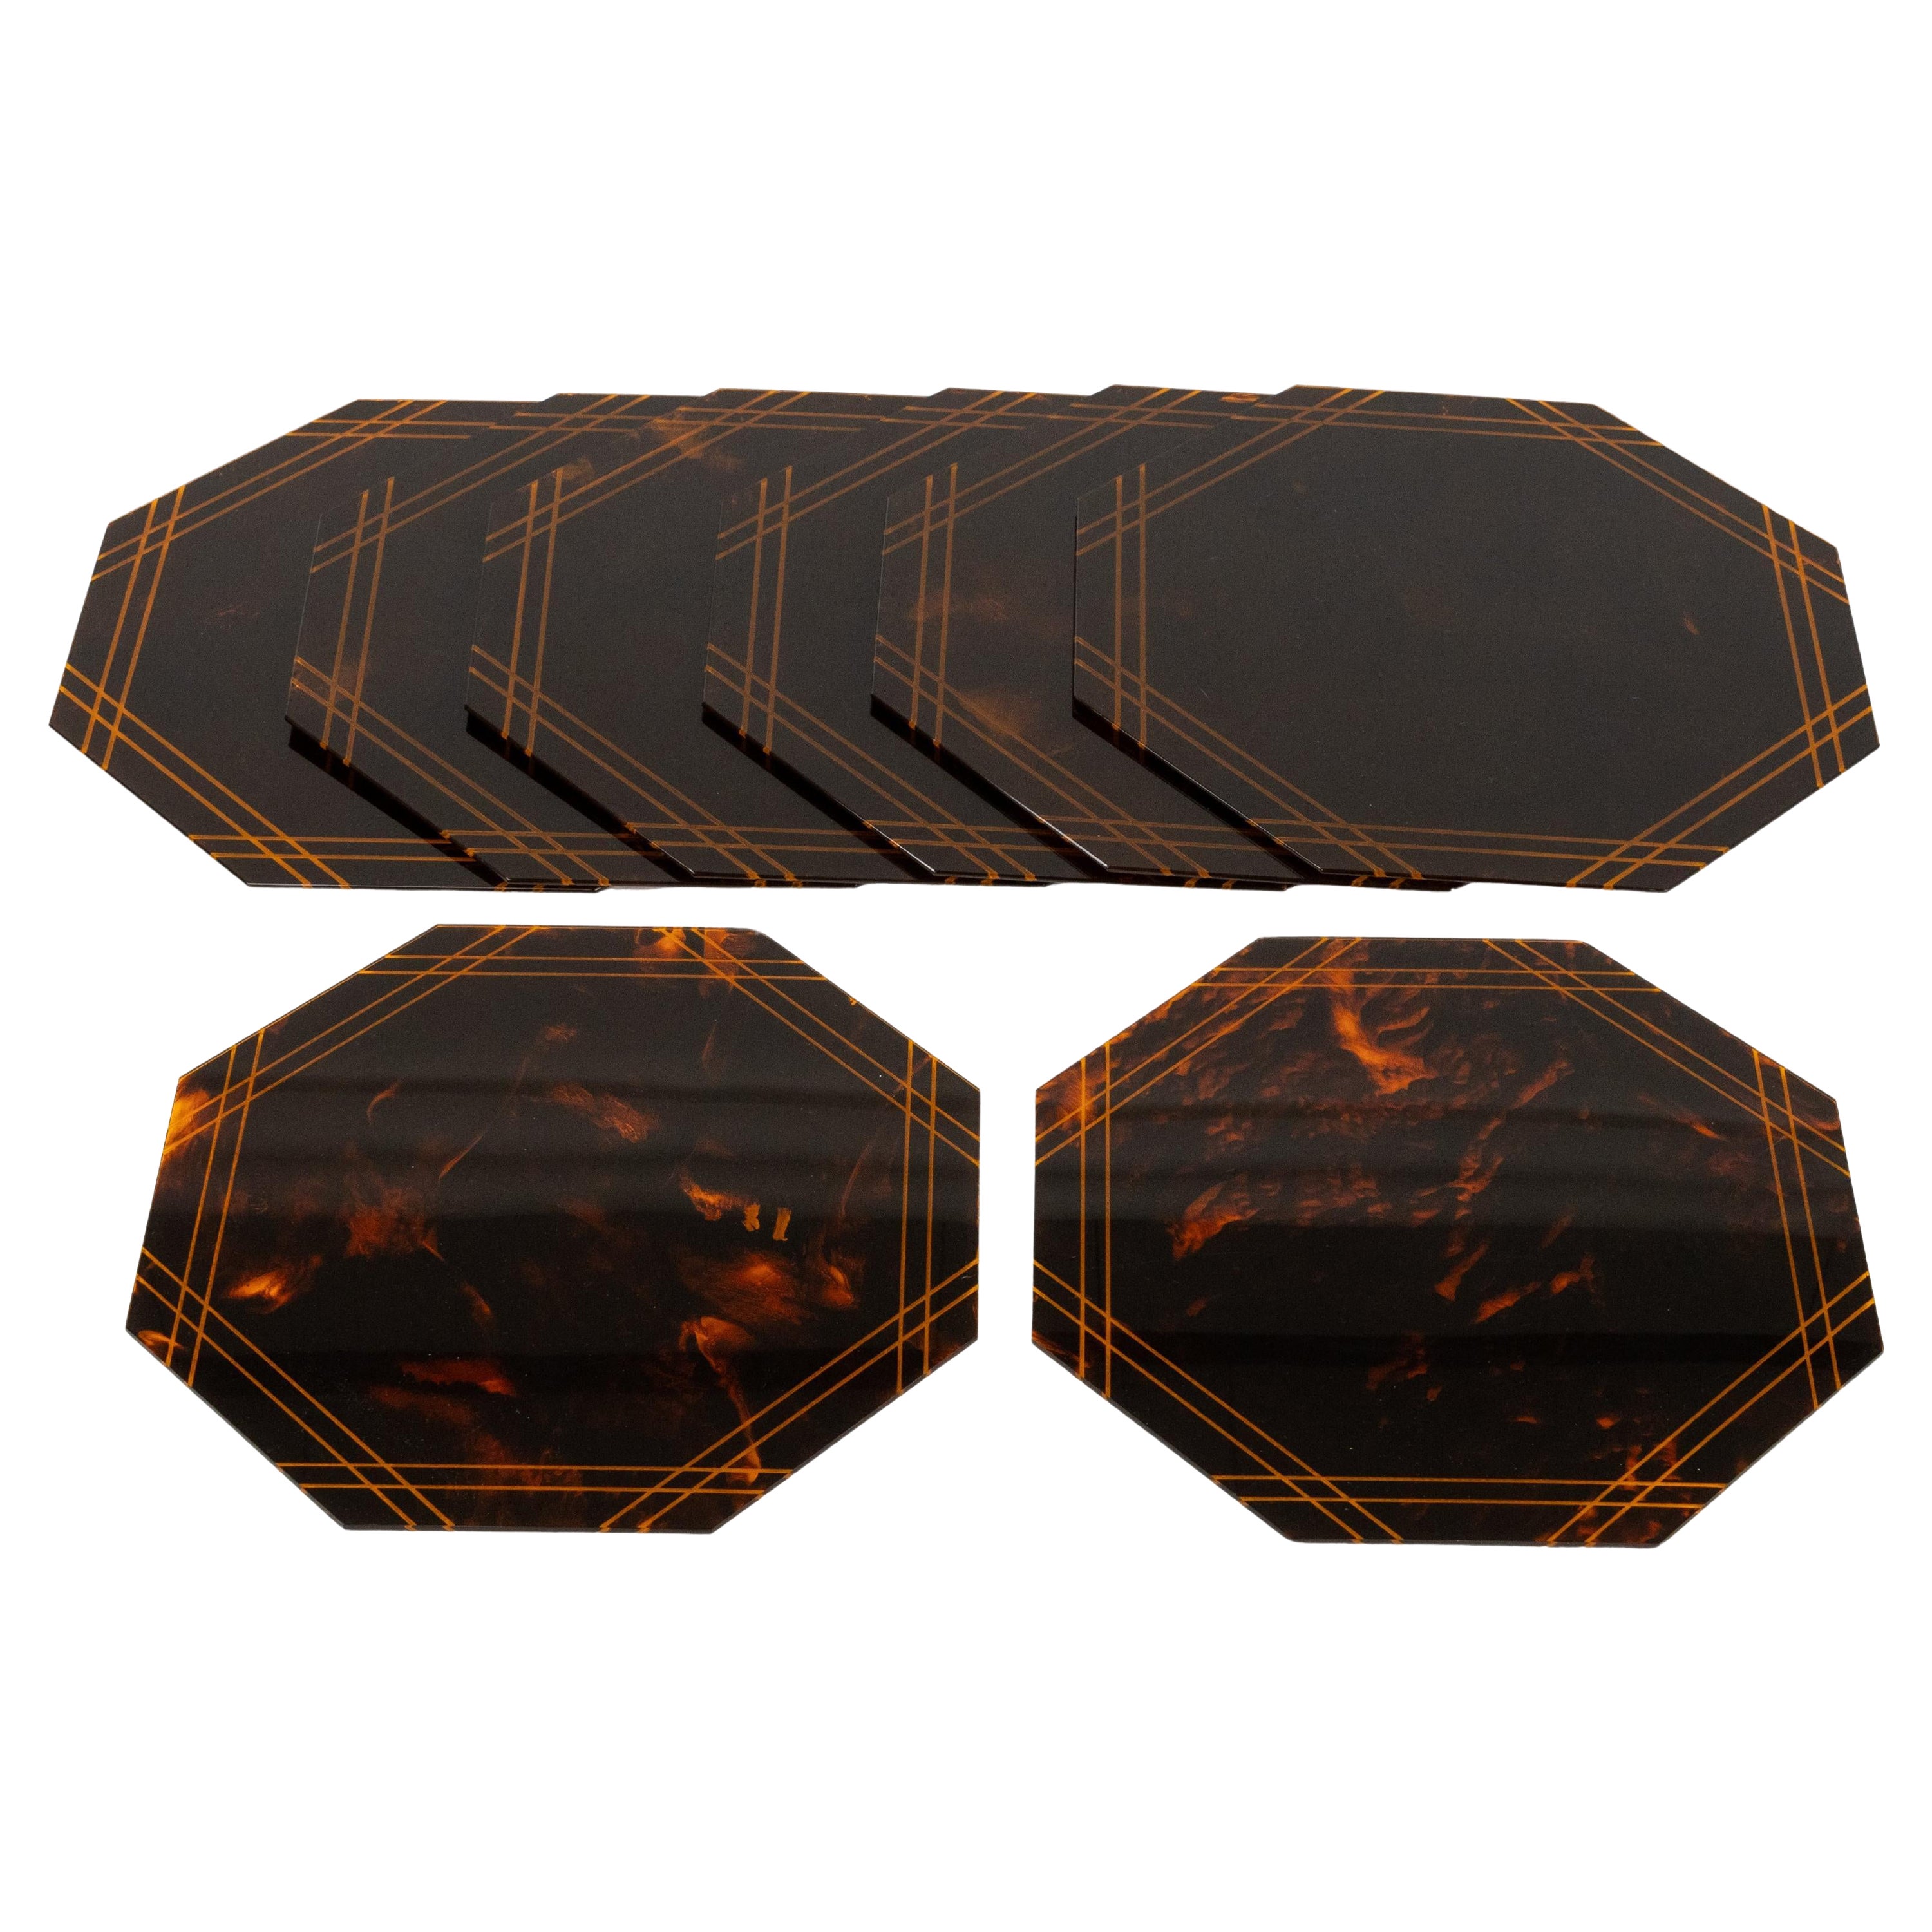 Set of Eight Placemats Tortoiseshell Effect Lucite by Team Guzzini, Italy 1970s For Sale